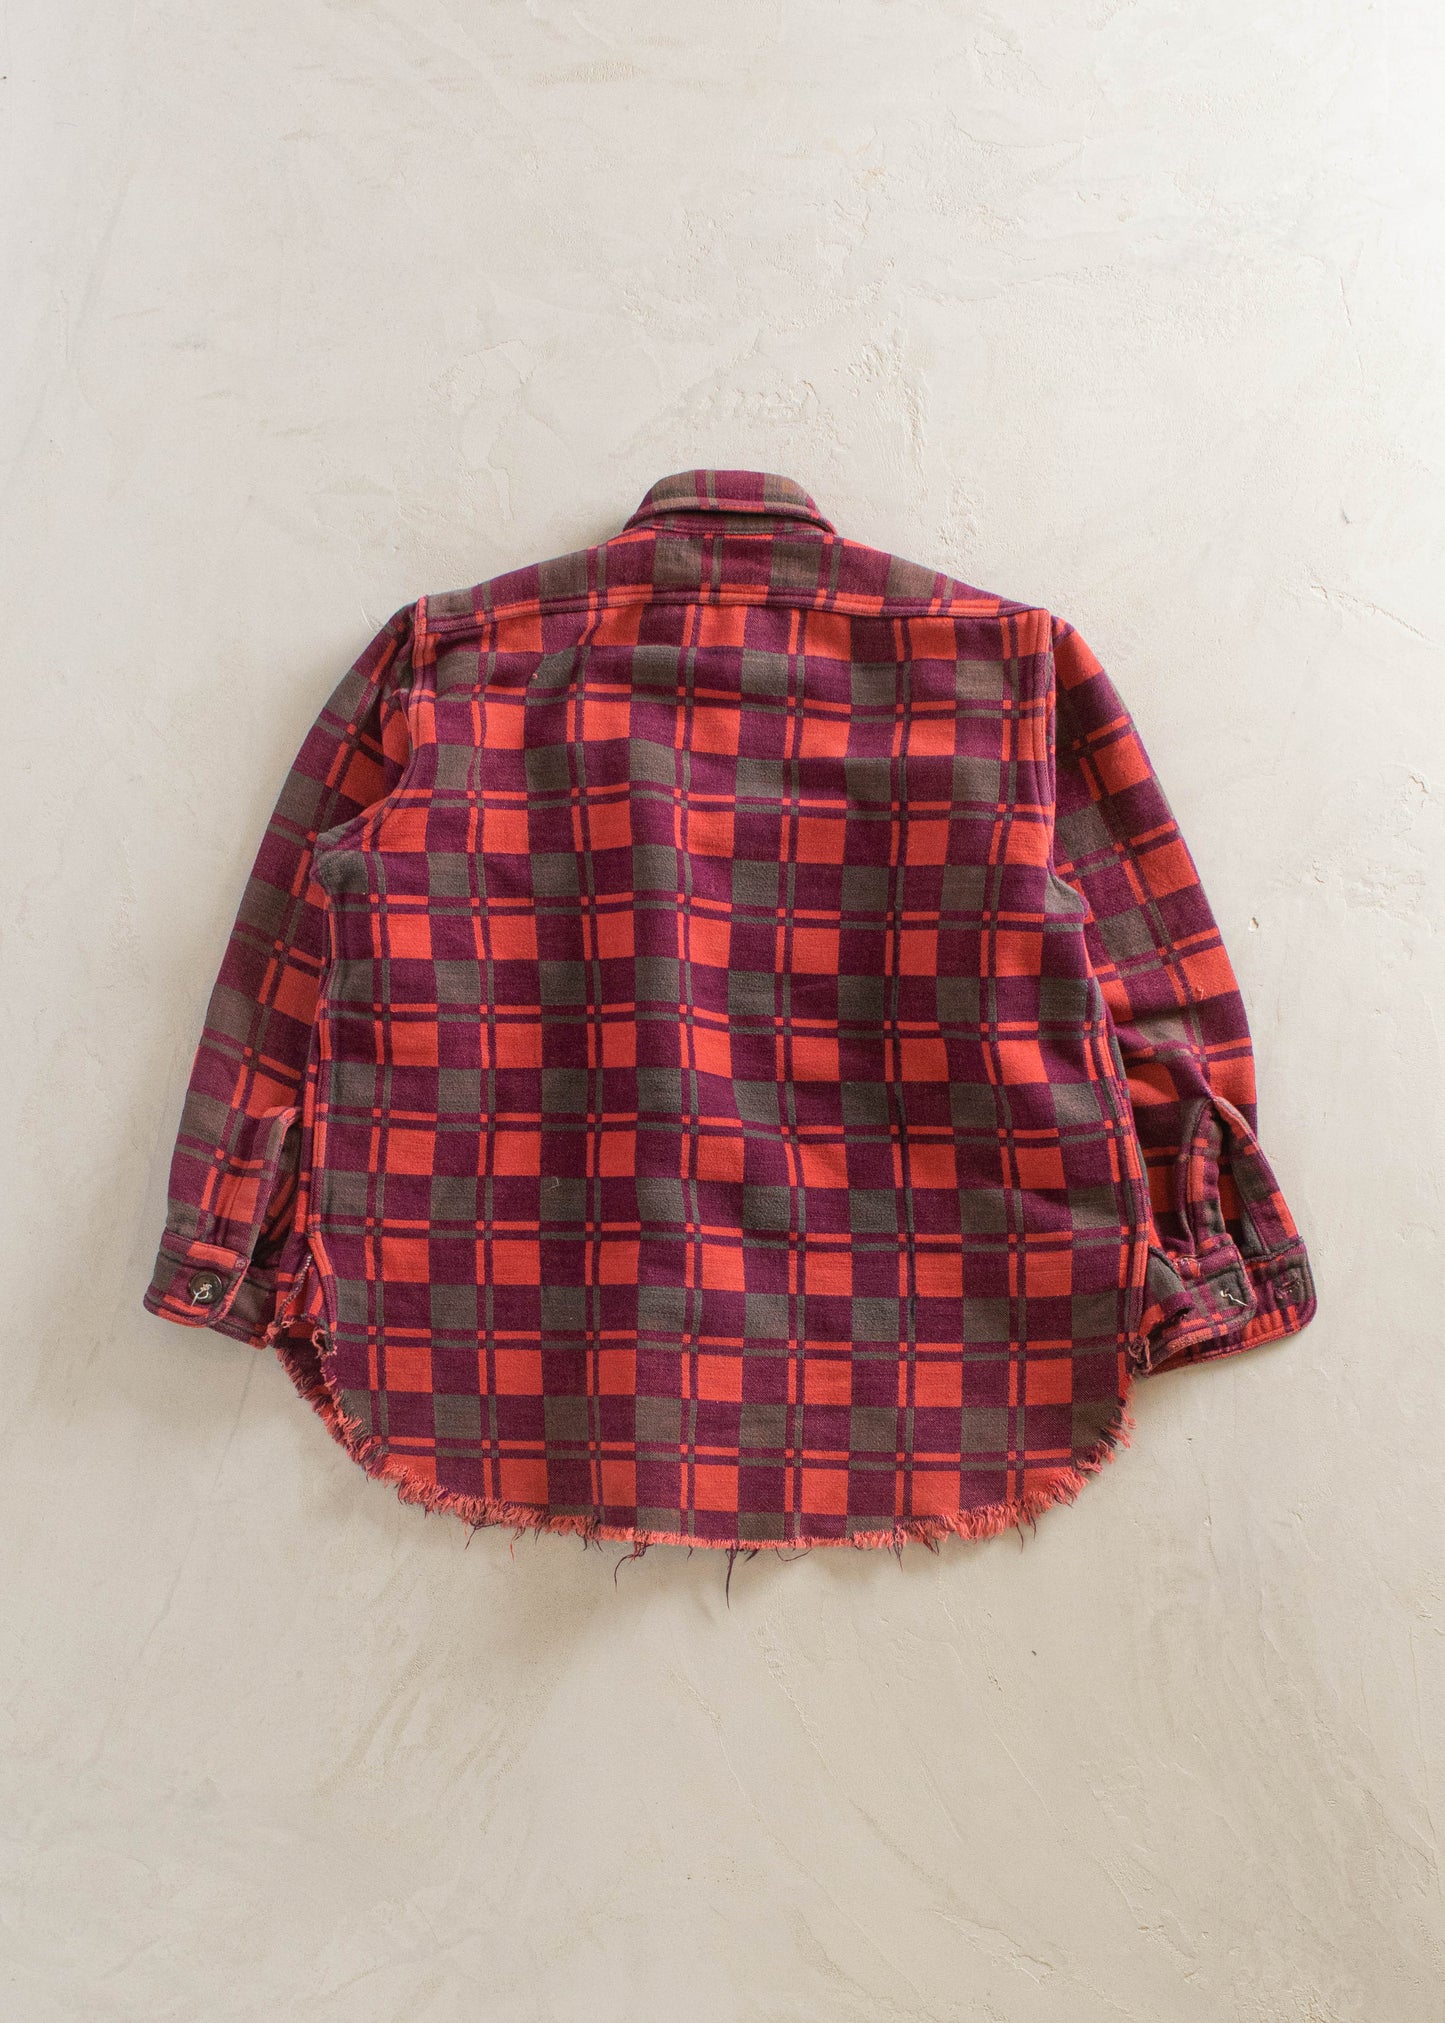 1980s Champion Flannel Button Up Size S/M